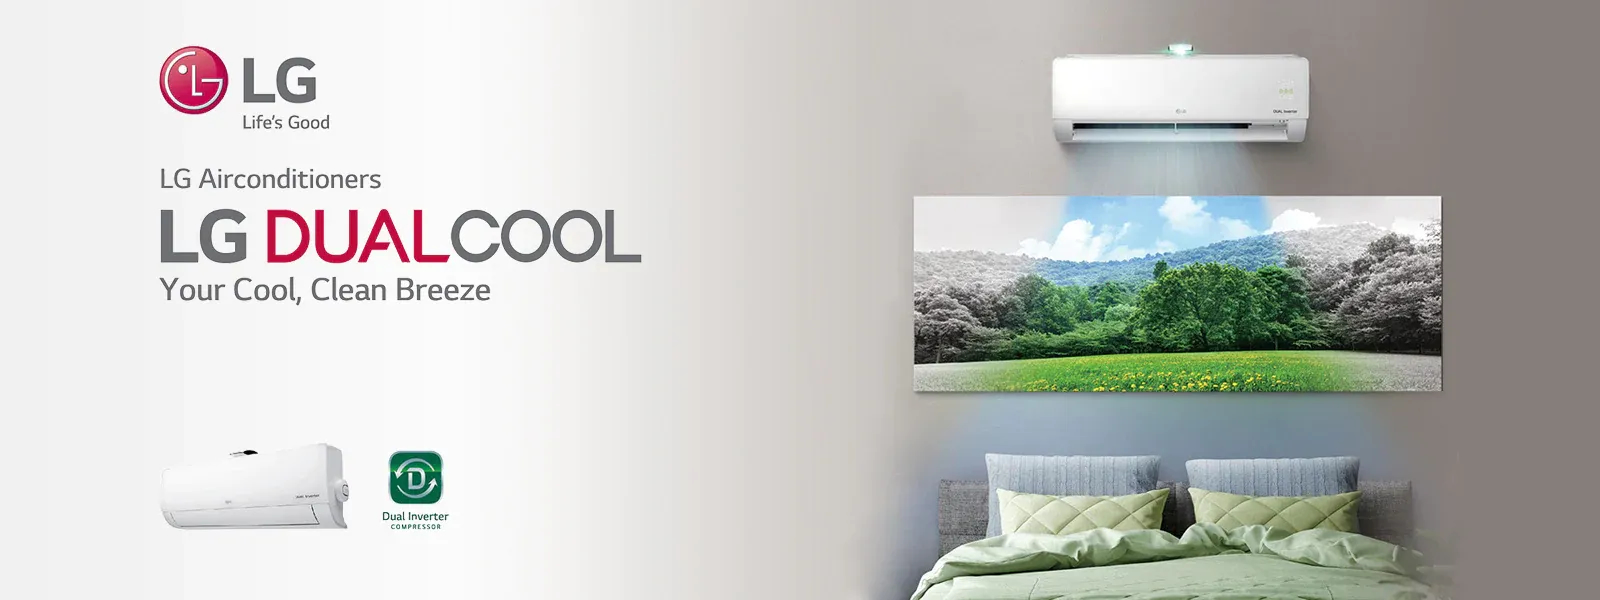 LG AC Technologies in India- overall review